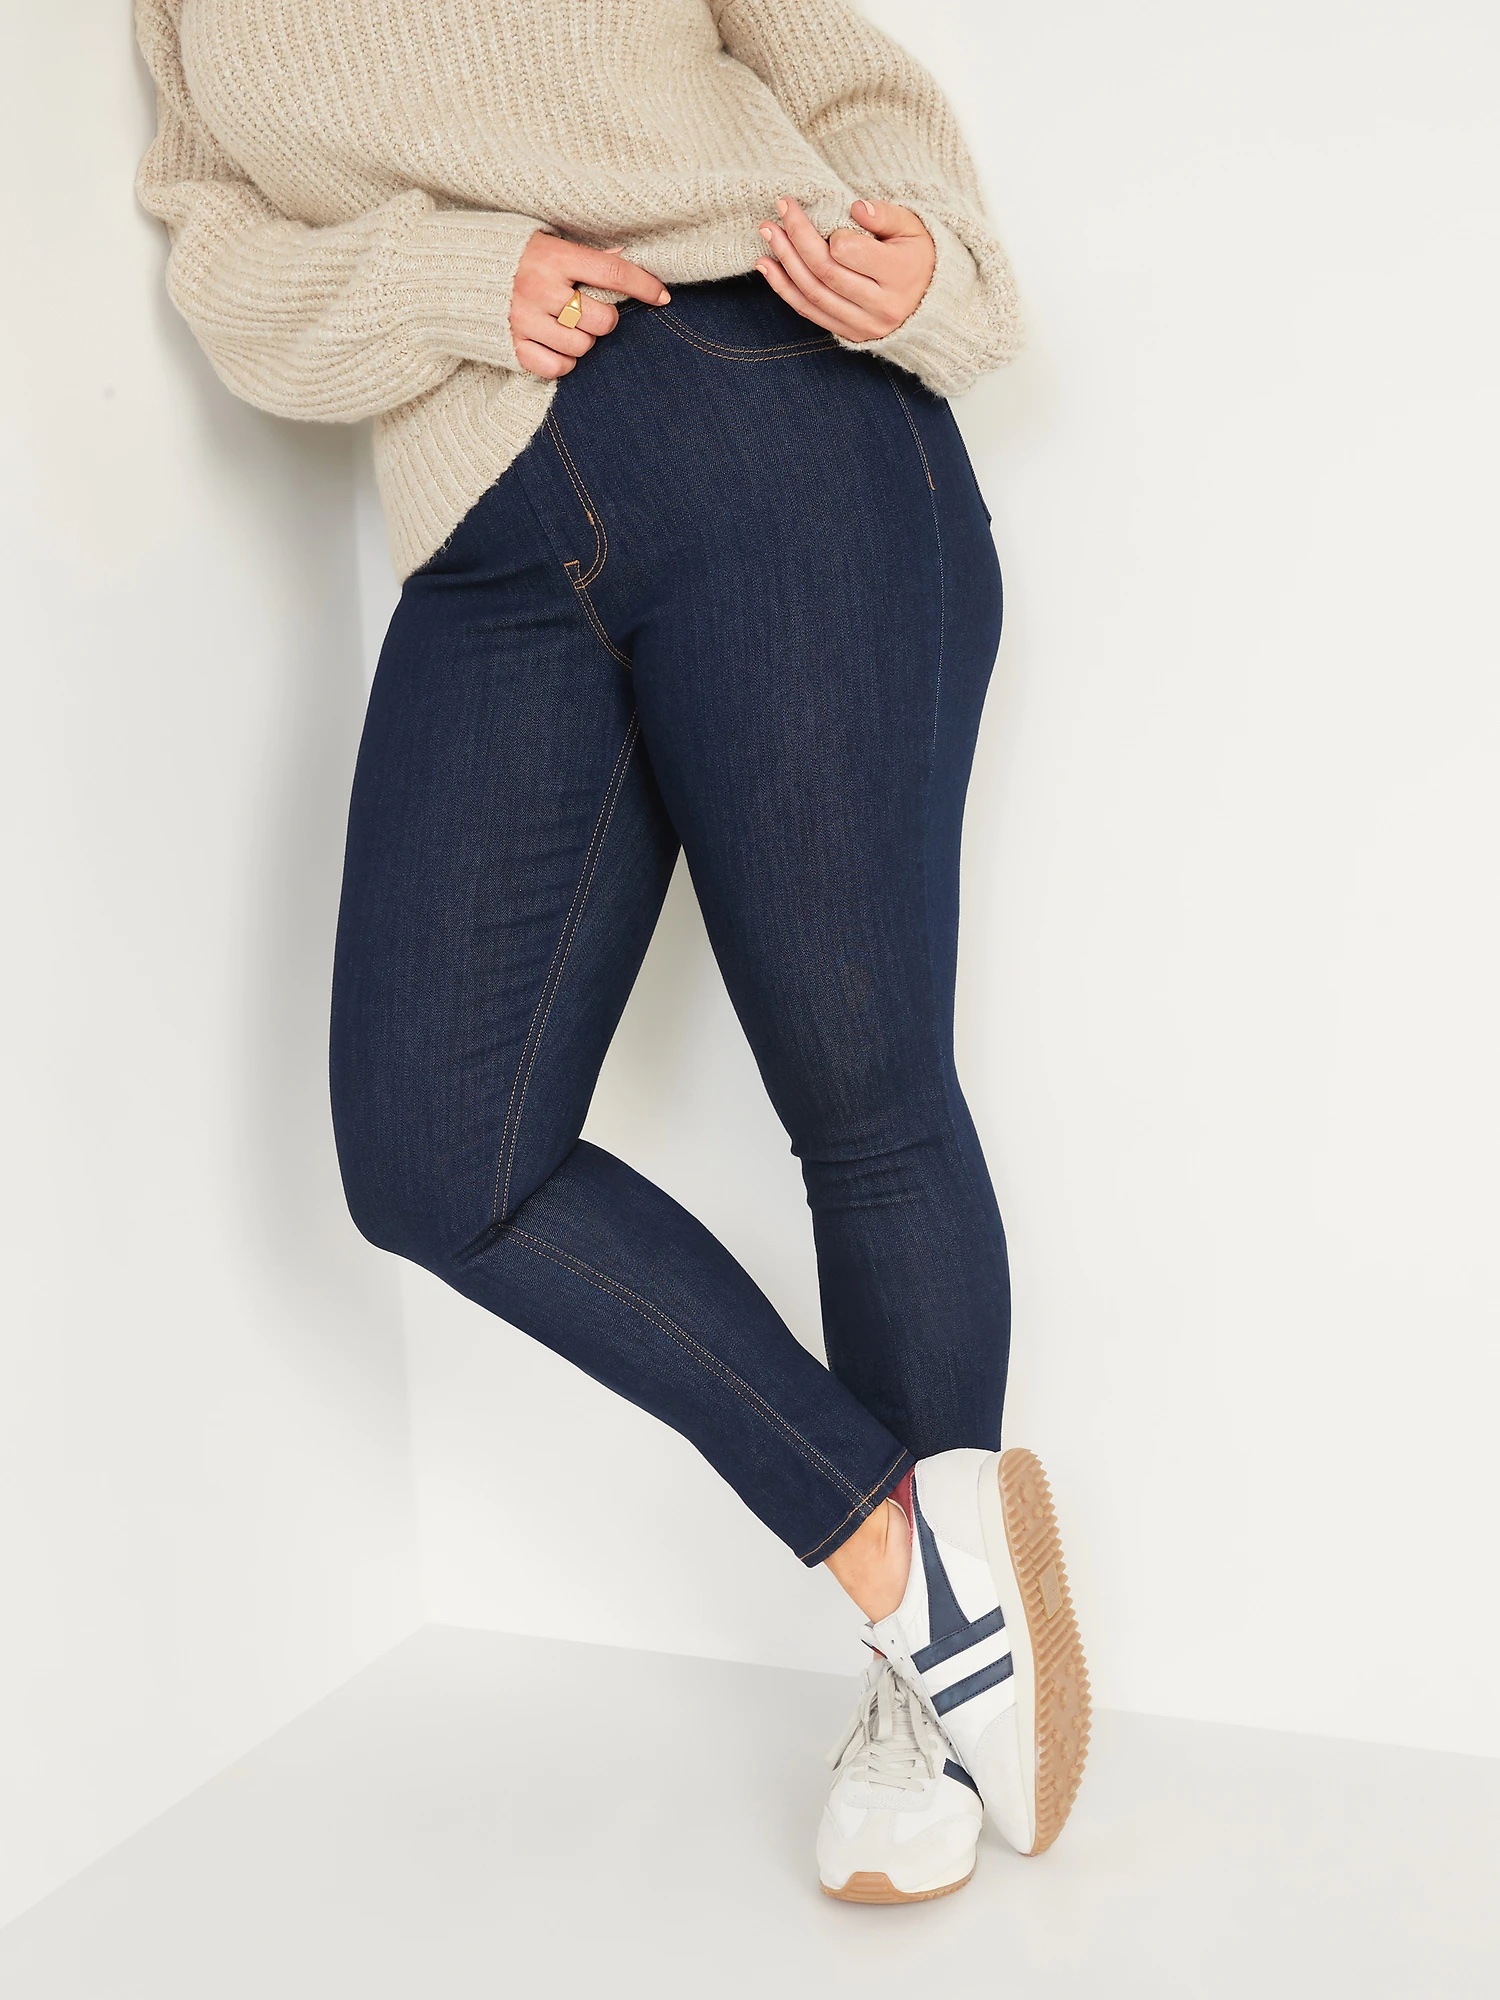 14 of the Best Jeggings That Look Like Jeans